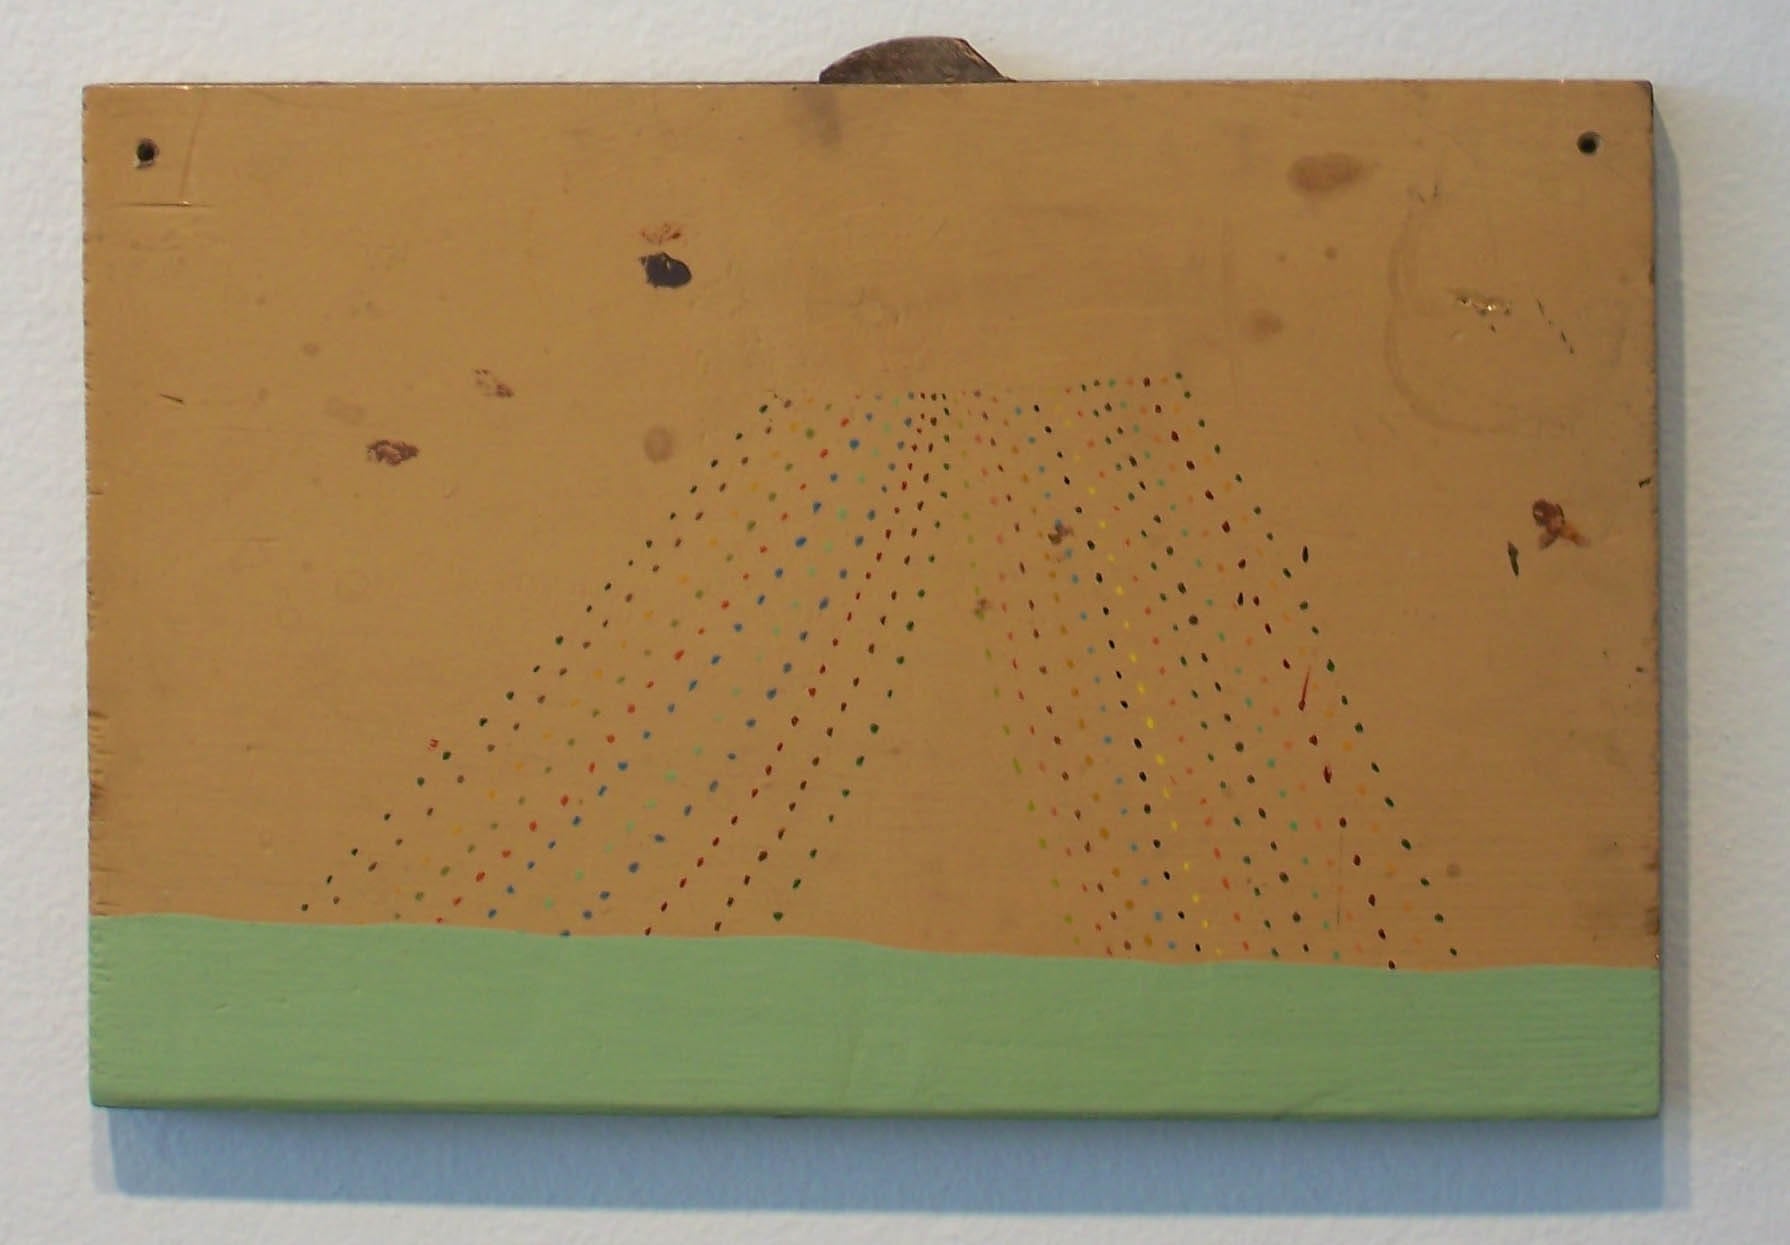 Alicia McCarthy, painted wooden block